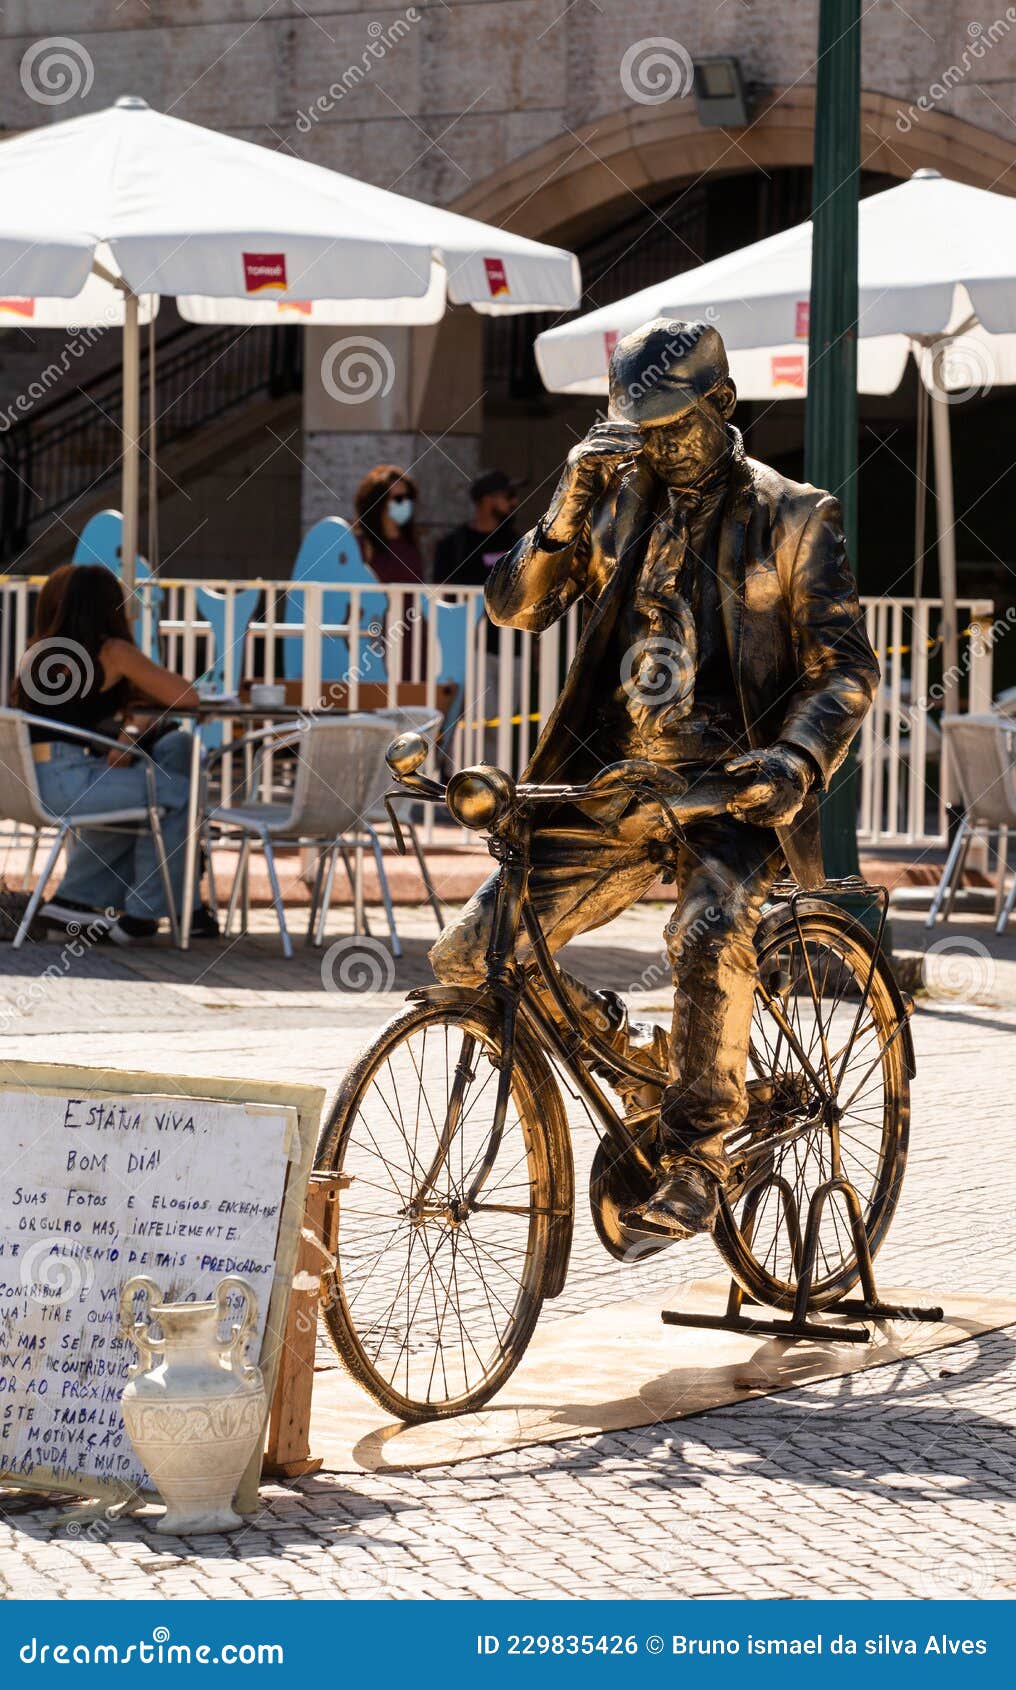 11 September 2021, a Living Sculpture Vintage Cyclist Performing in the  Street, Aveiro. Editorial Photo - Image of city, bronze: 229835426